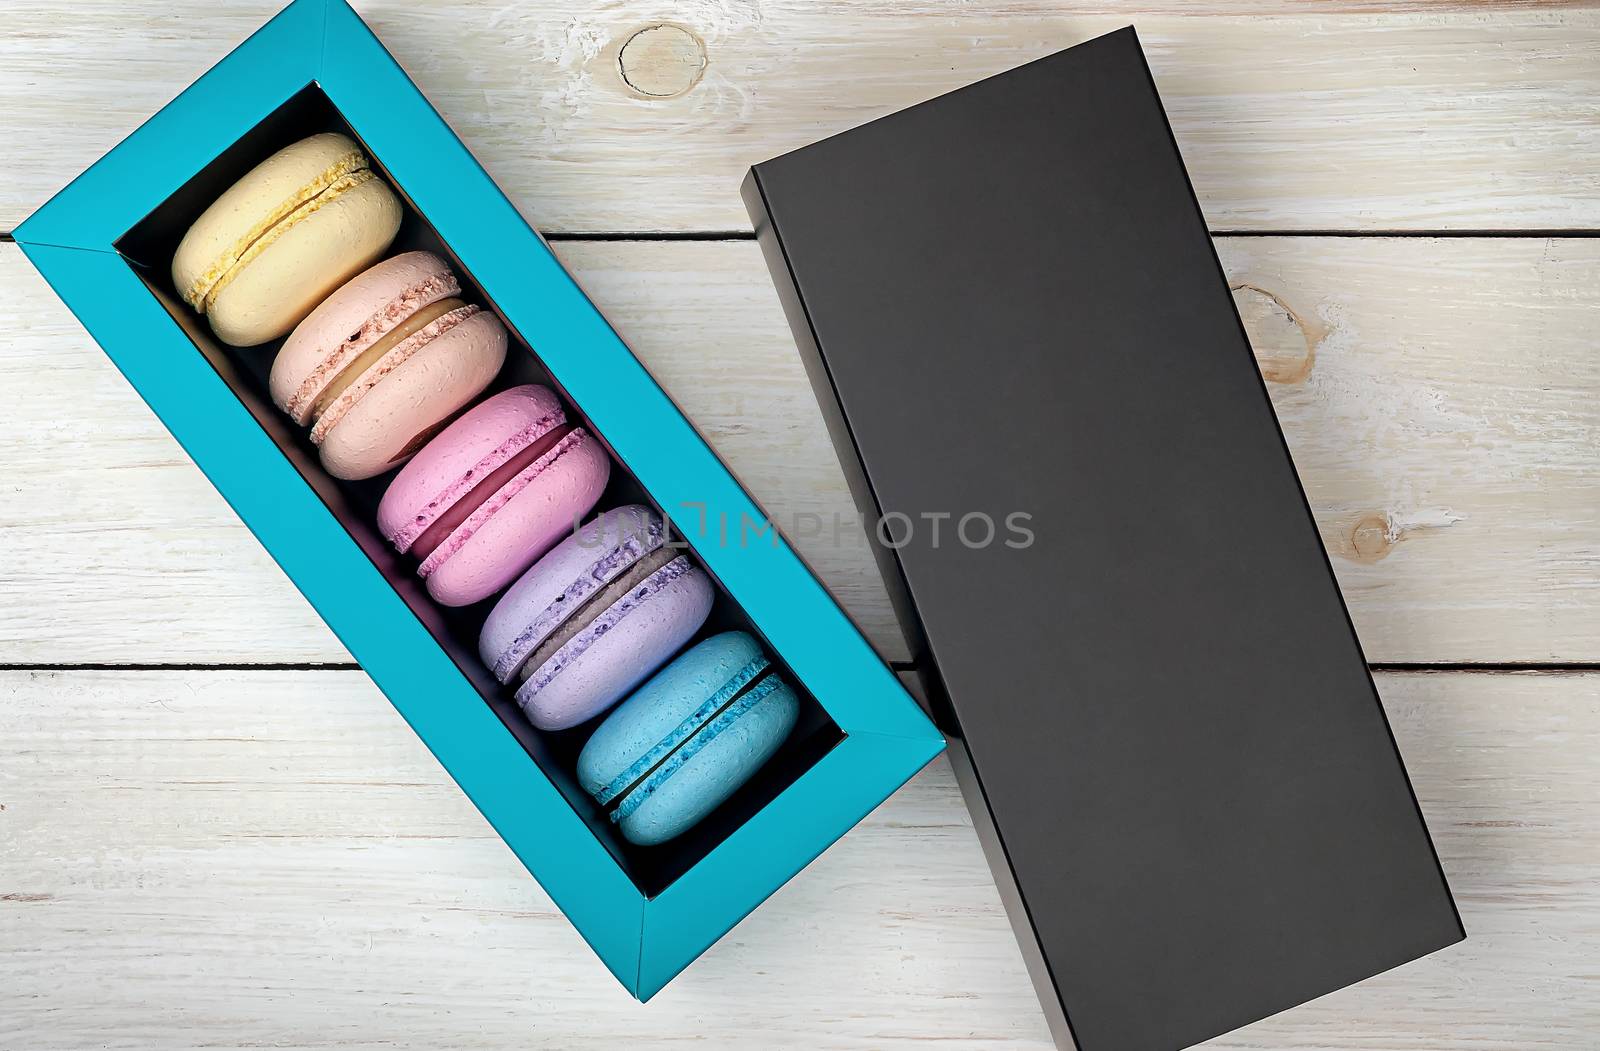 Macaroons in box next to lid on wooden background